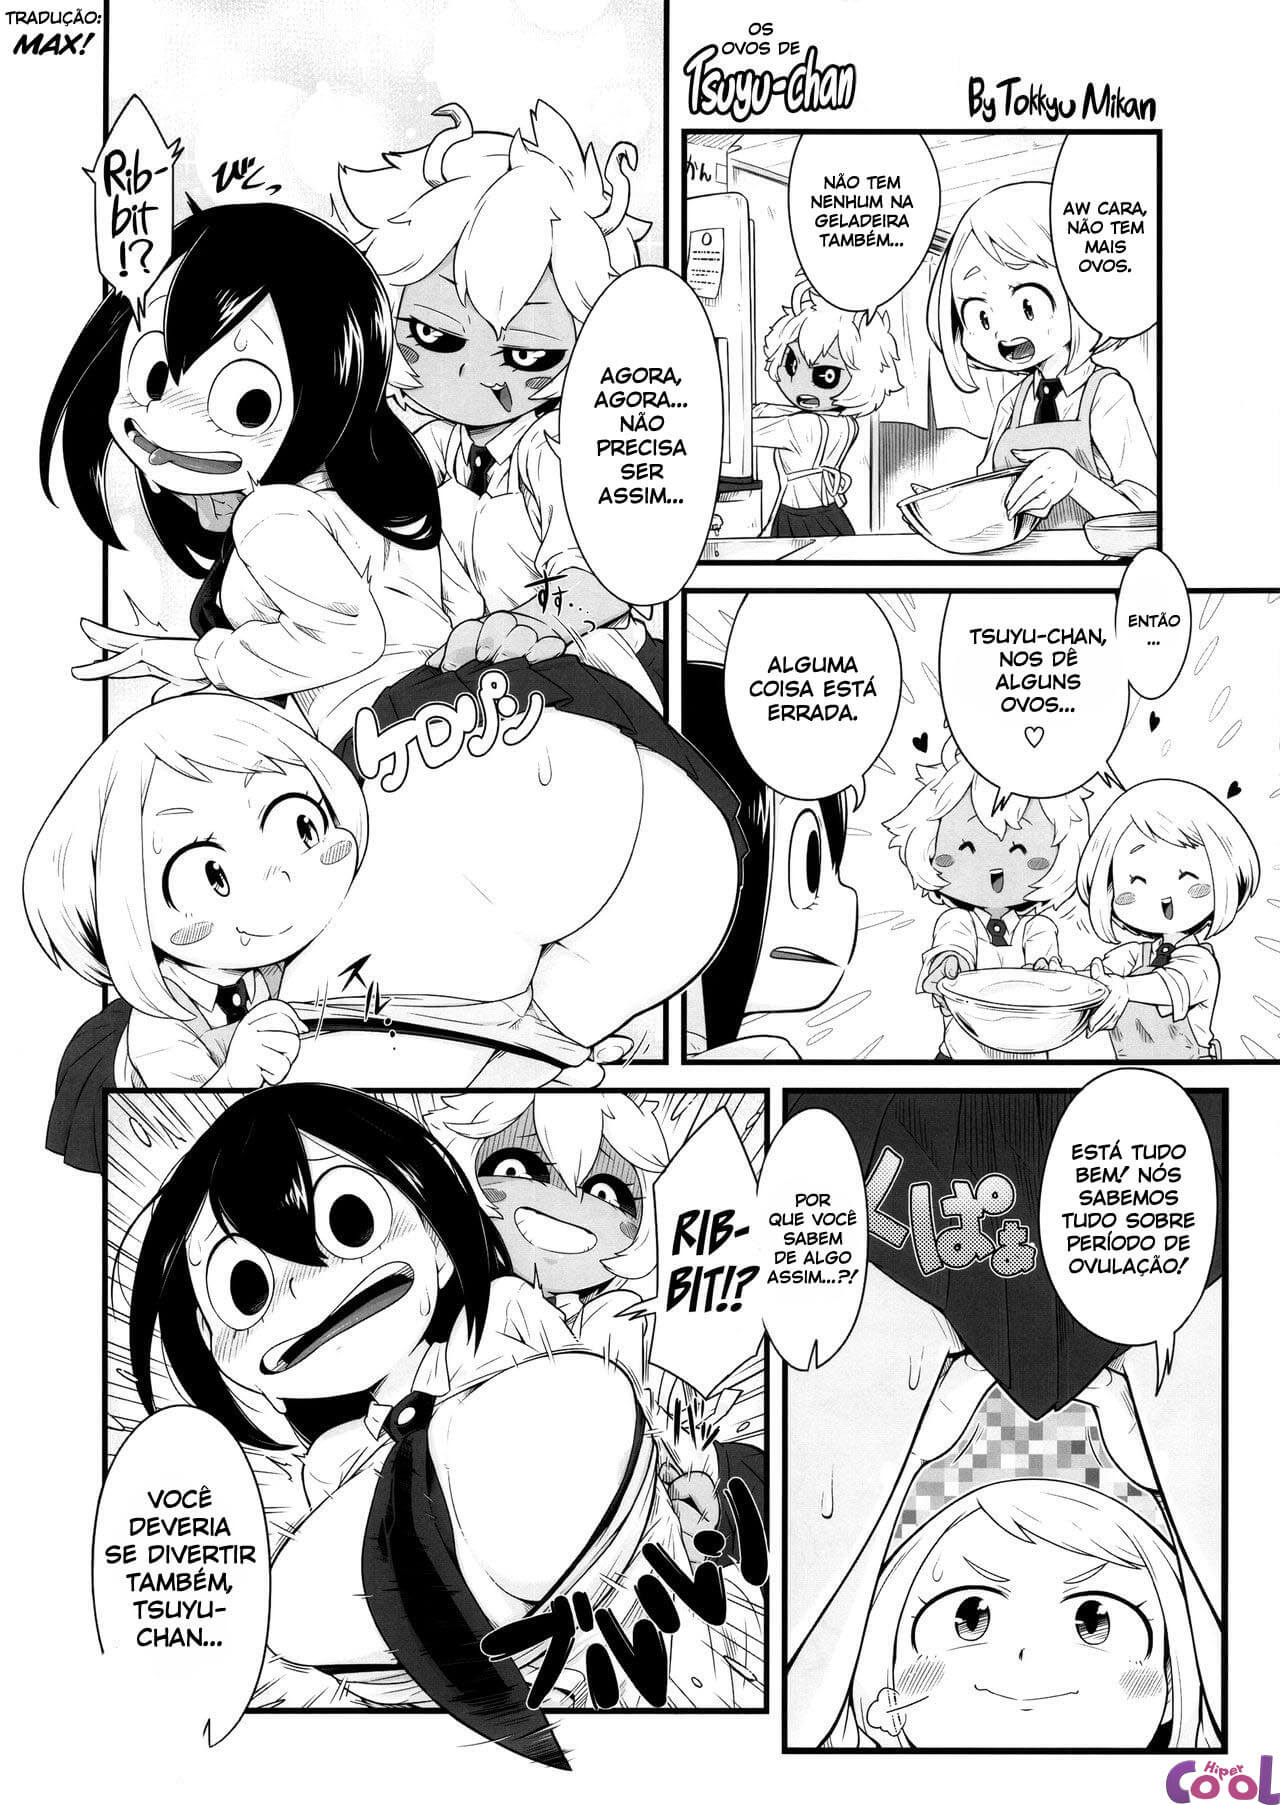 froppy-chapter-01-page-46.jpg